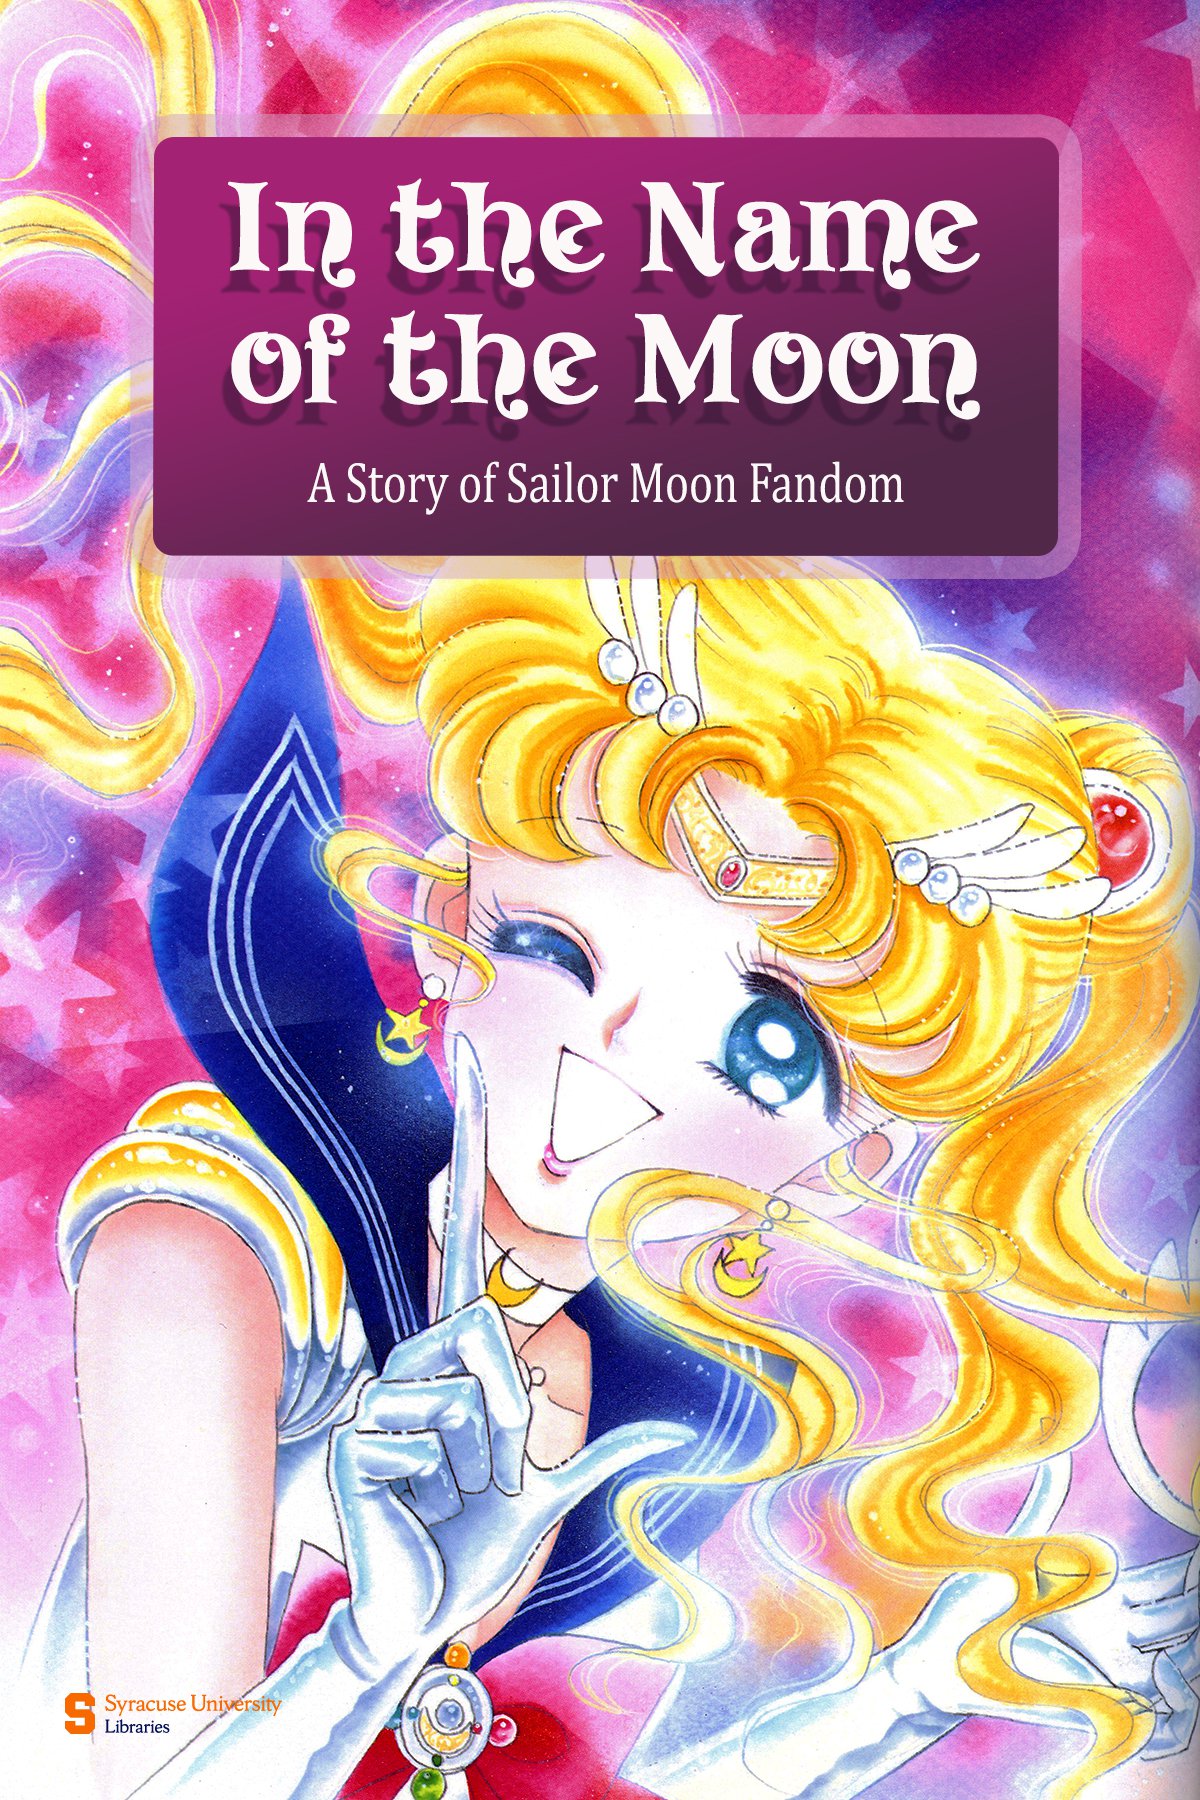 In the name of the Moon. With illustration of Sailor Moon anime